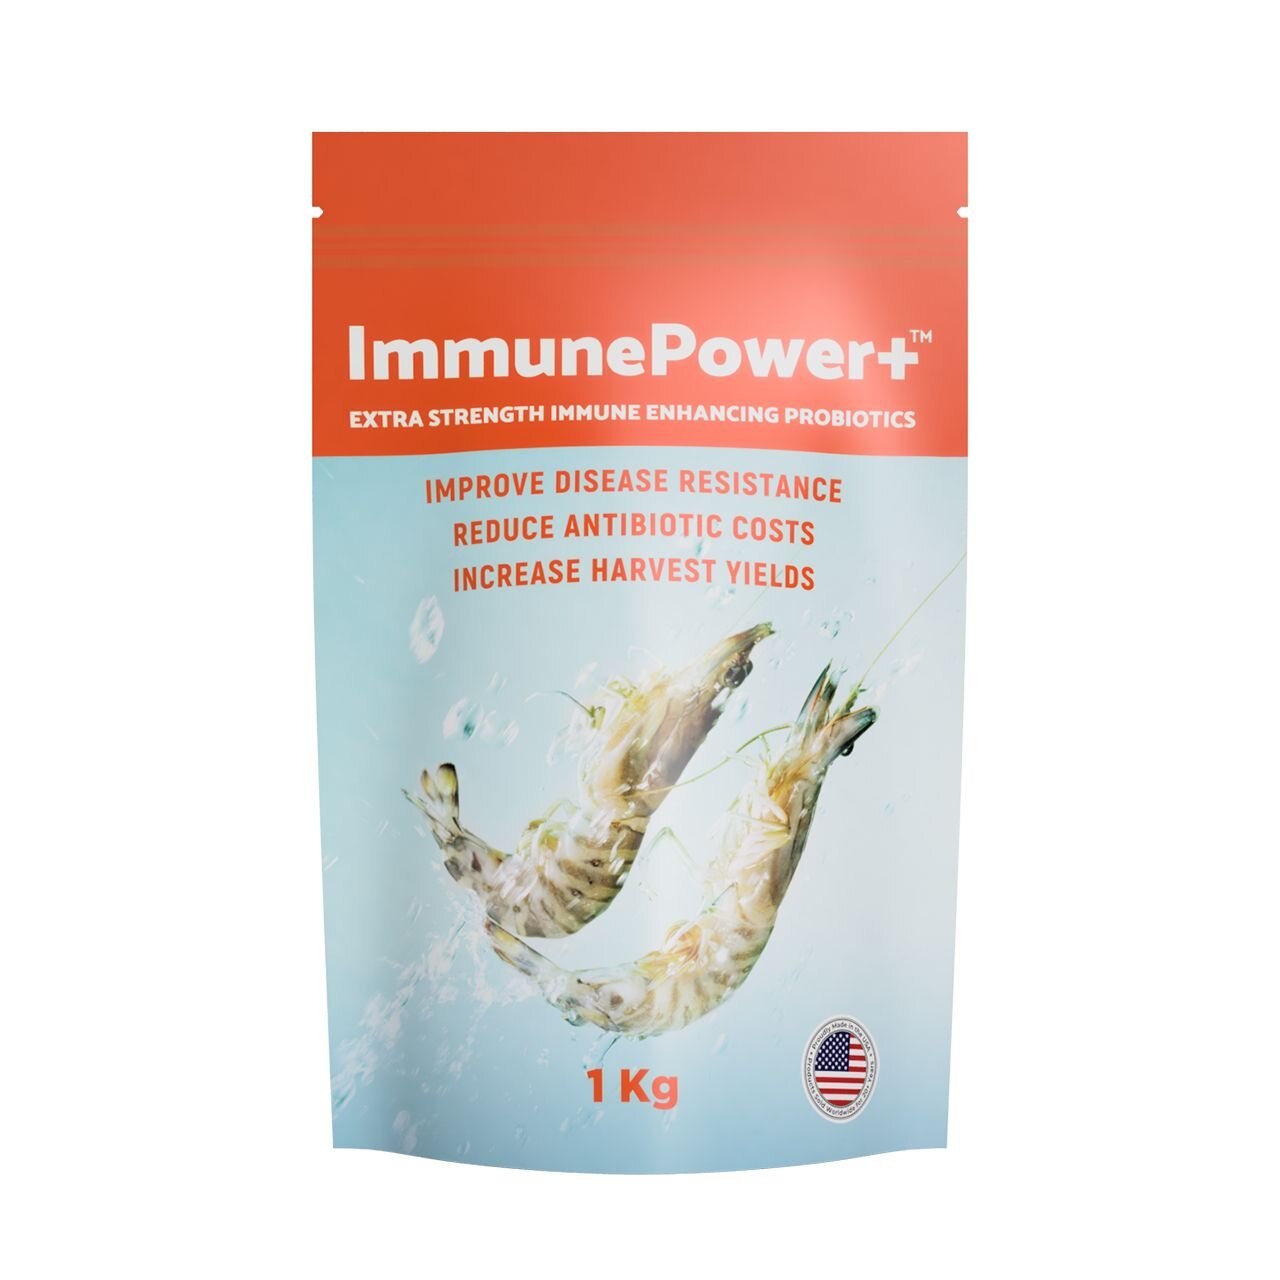 ImmunePower+™ Feed Additive for Shrimp Farming Package